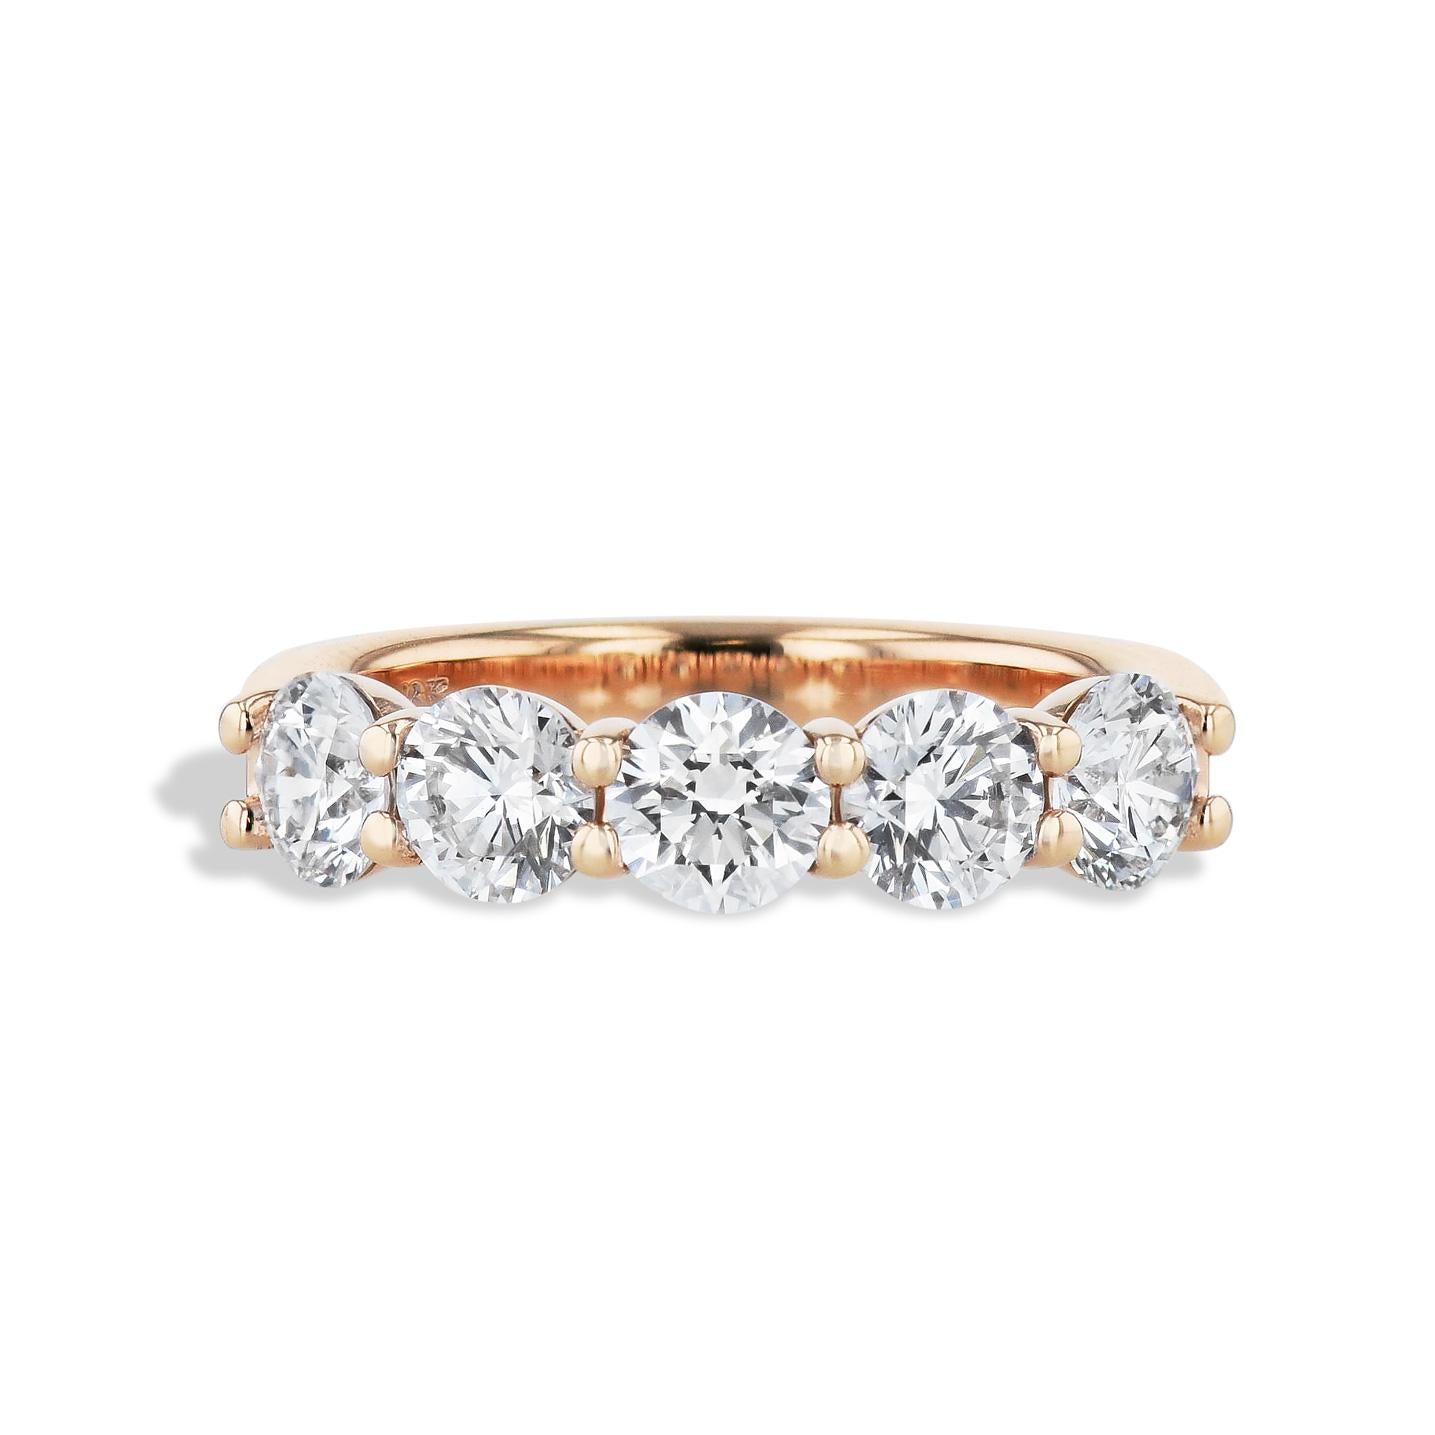 Brilliant Cut 1.85 Carat 5 Stone Diamond Rose Gold Anniversary Band Ring GIA Certified For Sale